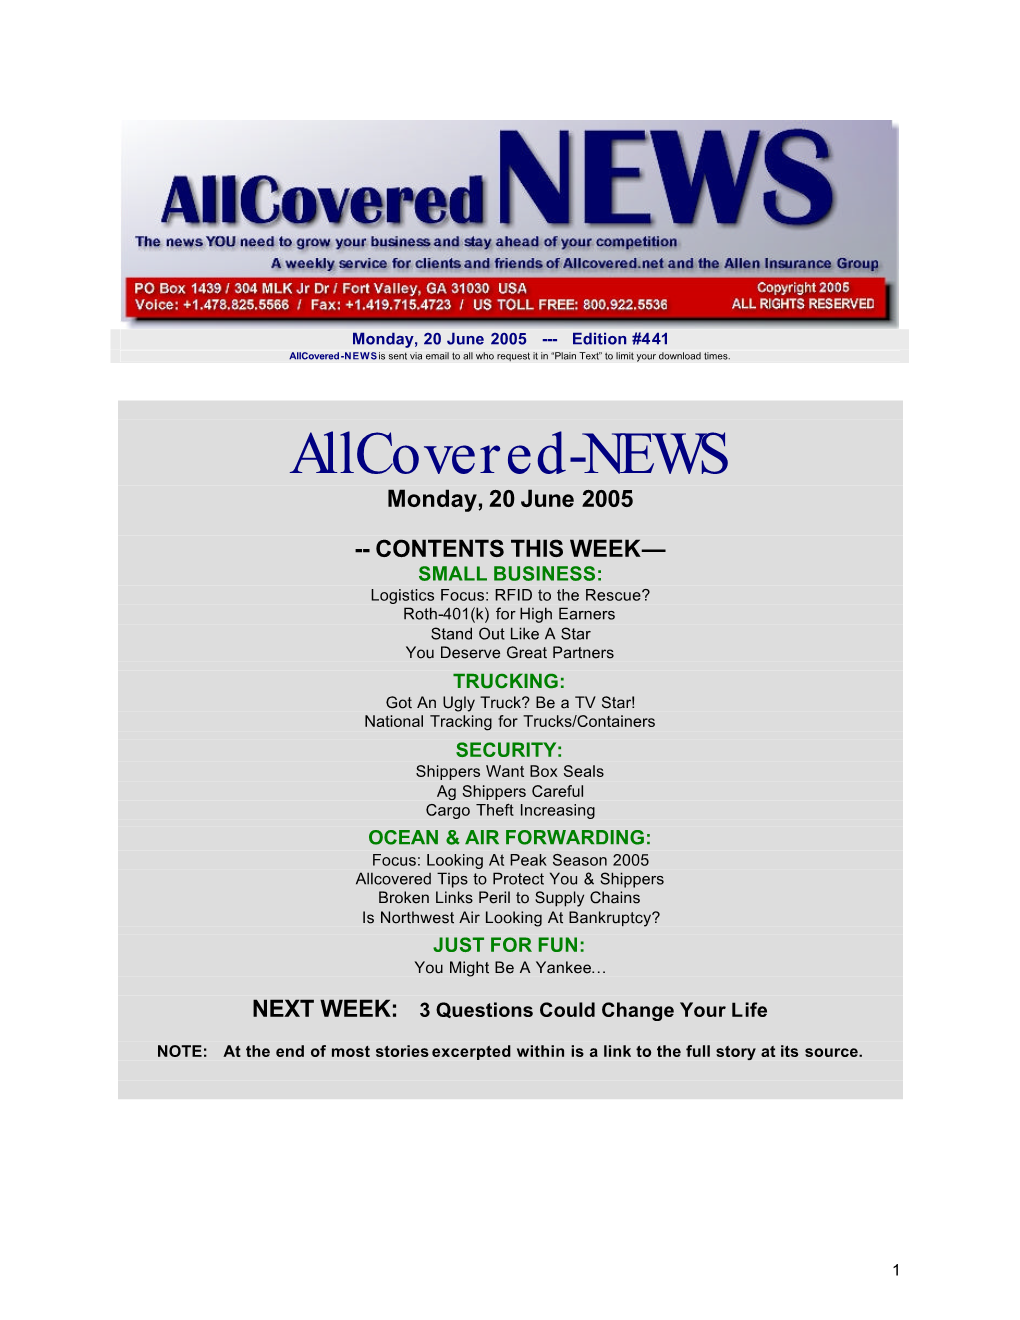 Allcovered-NEWS Is Sent Via Email to All Who Request It in “Plain Text” to Limit Your Download Times